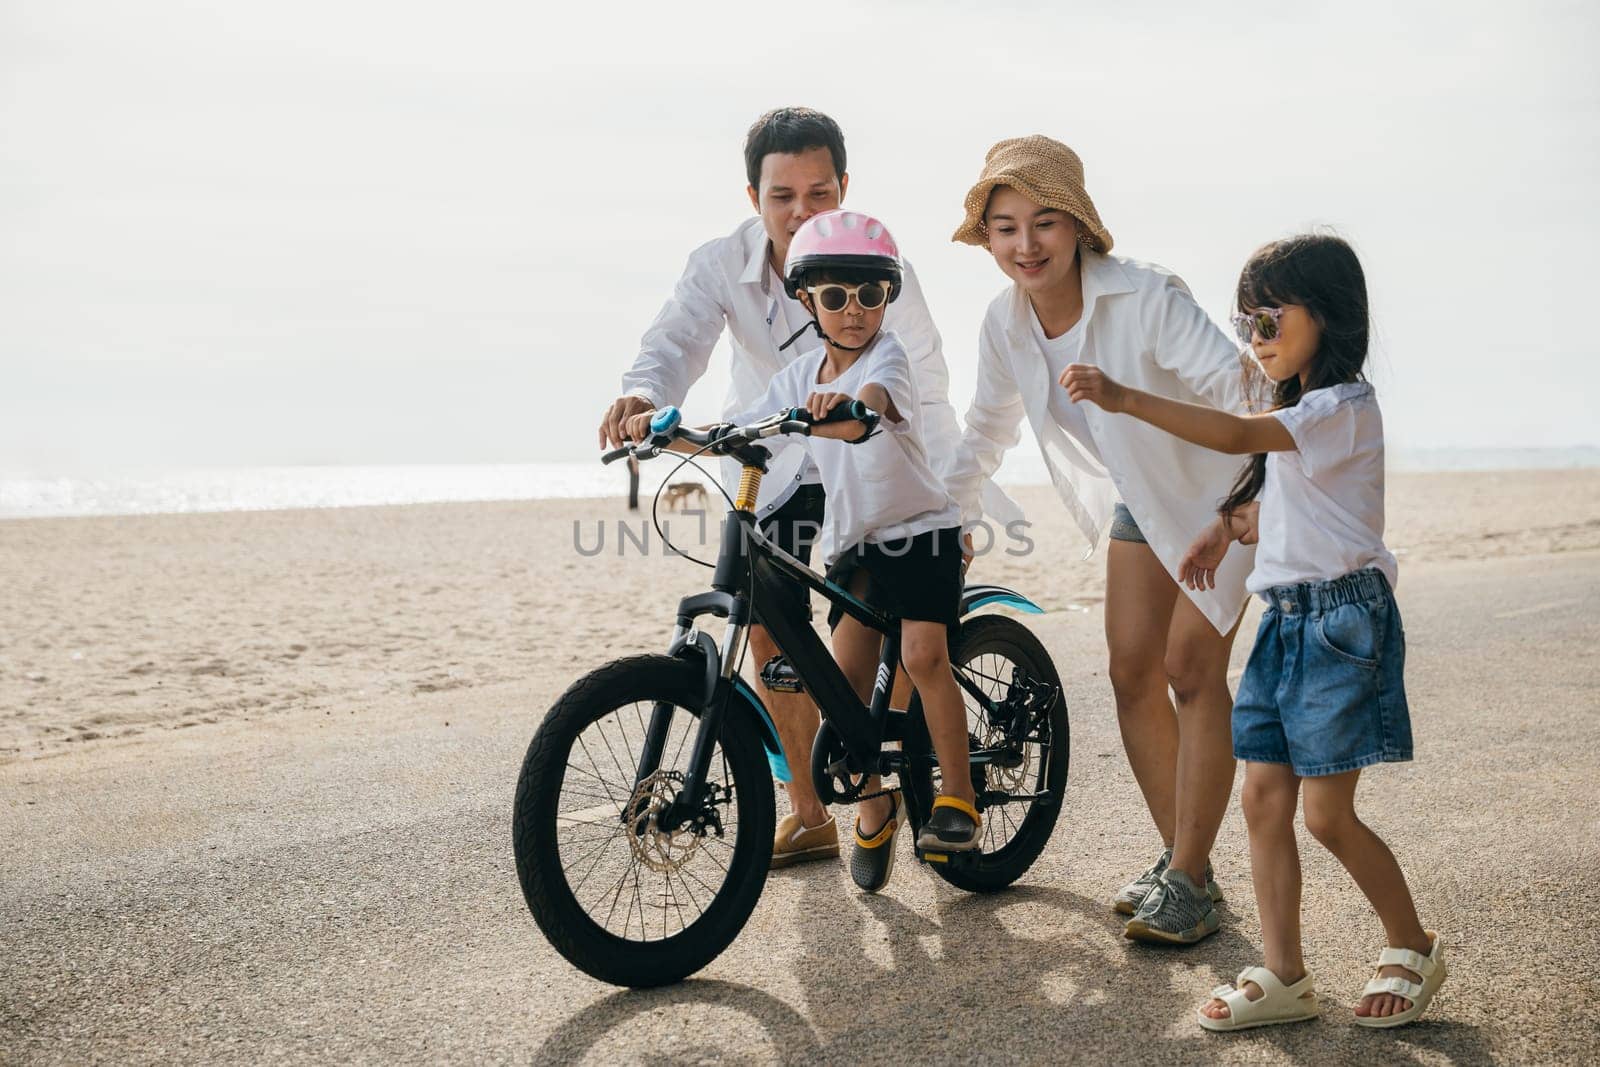 As sun sets on summer day cheerful family enjoys road trip teaching and learning to ride bicycles on sandy beach. Smiles happiness and spirit of adventure fill air in this perfect family portrait. by Sorapop